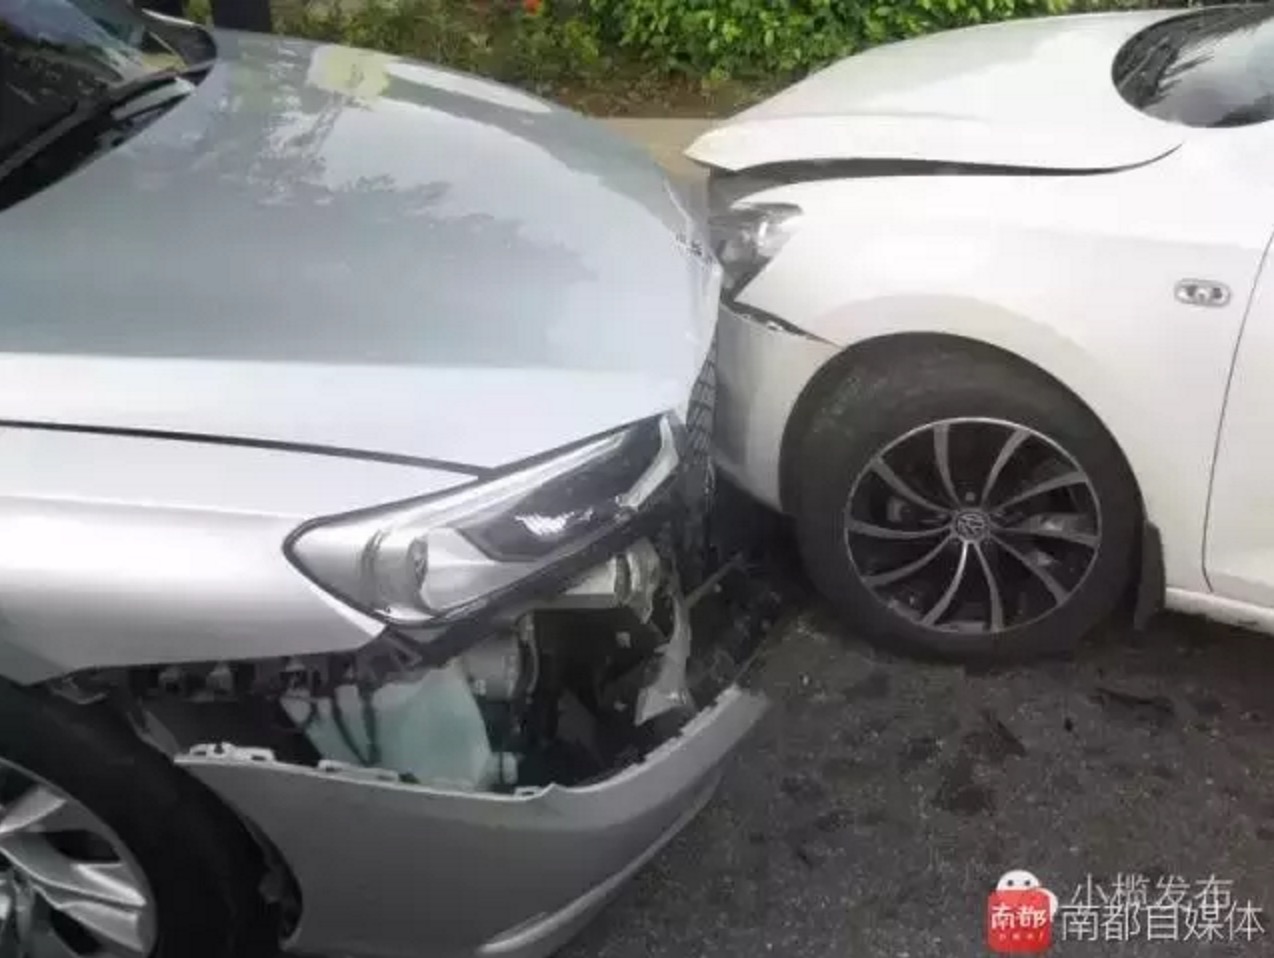 WATCH: Angry Driver Plays Bumper Cars in Guangdong